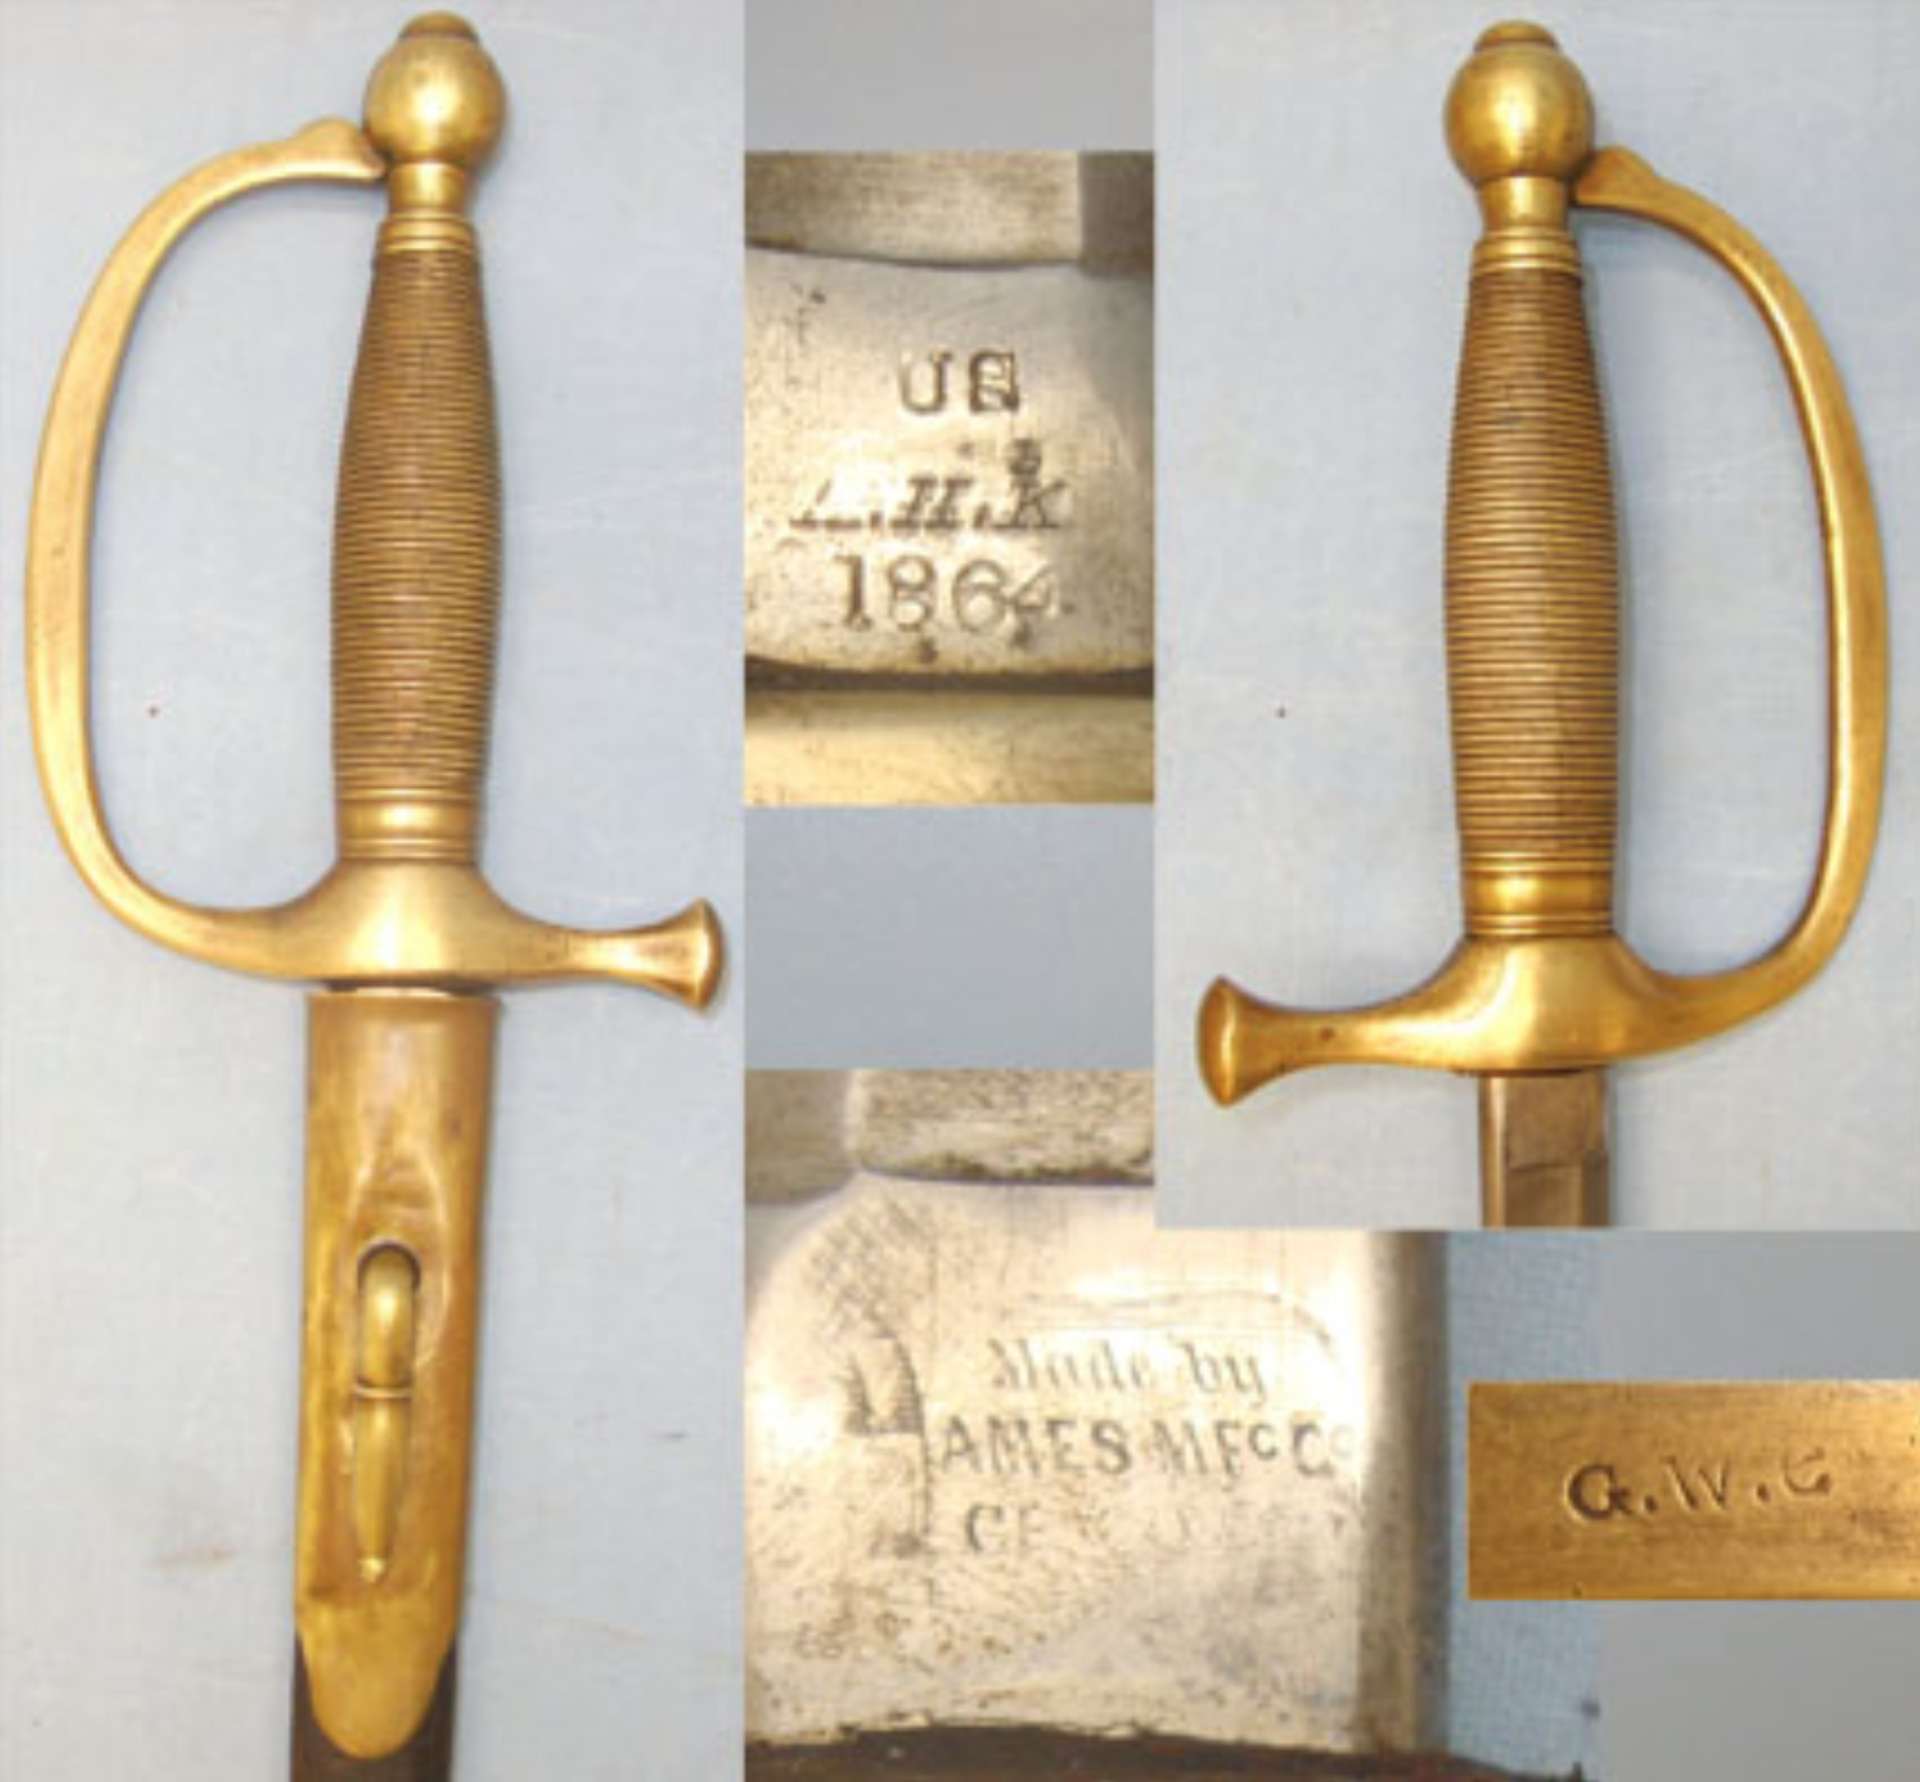 American Civil War 1864 Dated U.S. Army Model 1840 Bandsman's Sword By Ames Manufacturing Company - Image 3 of 3